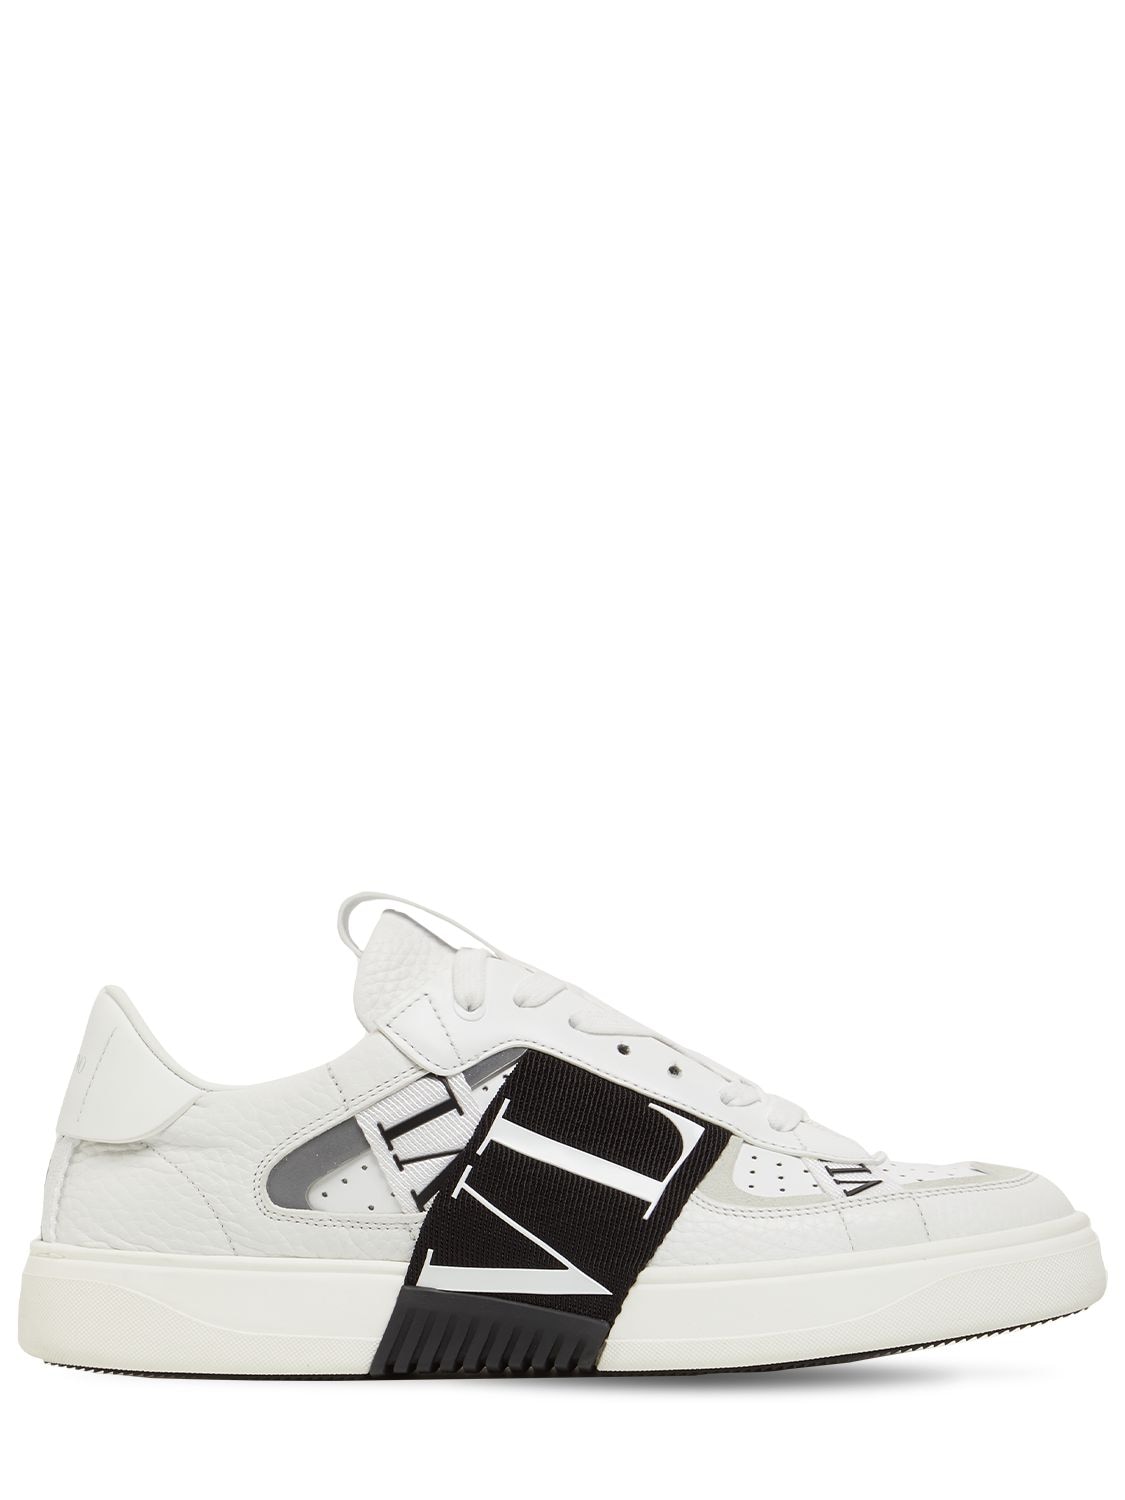 Shop Valentino Vl7n Leather Sneakers In White,black